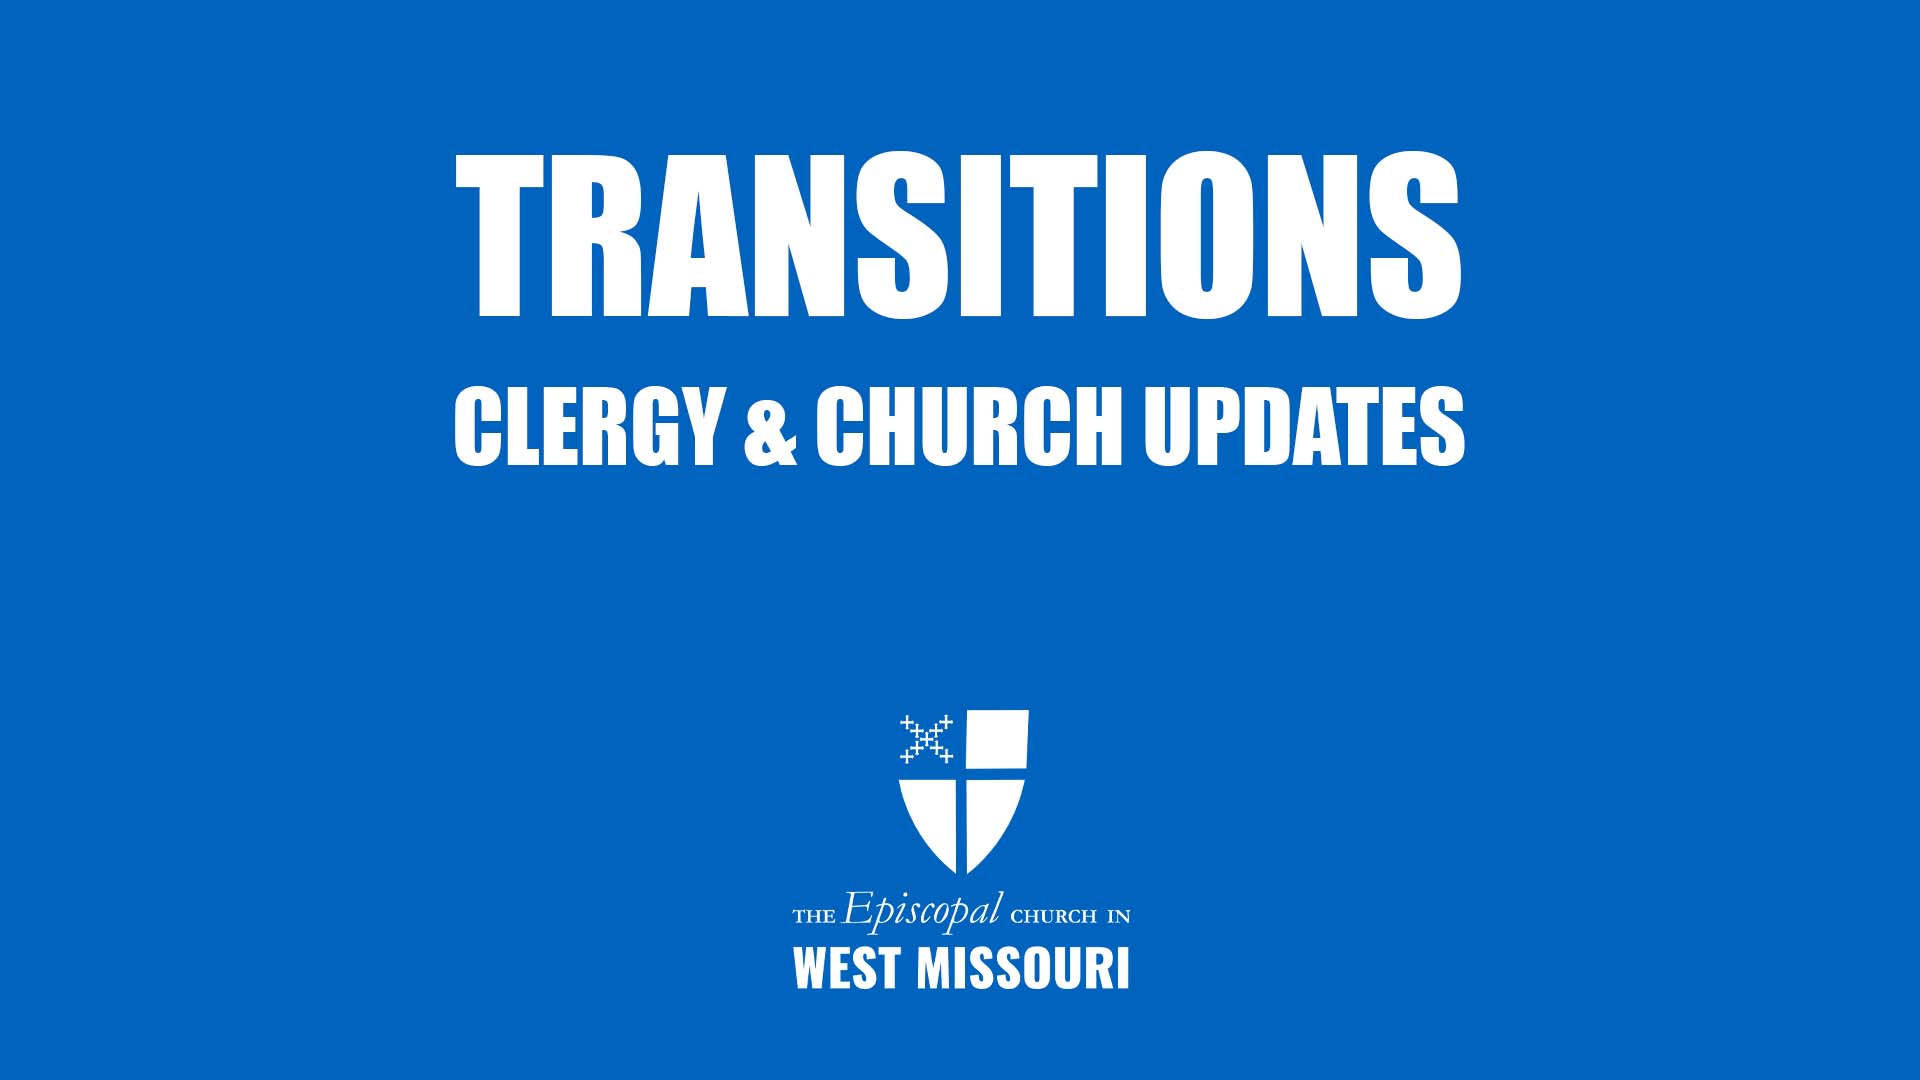 Transitions within the Diocese